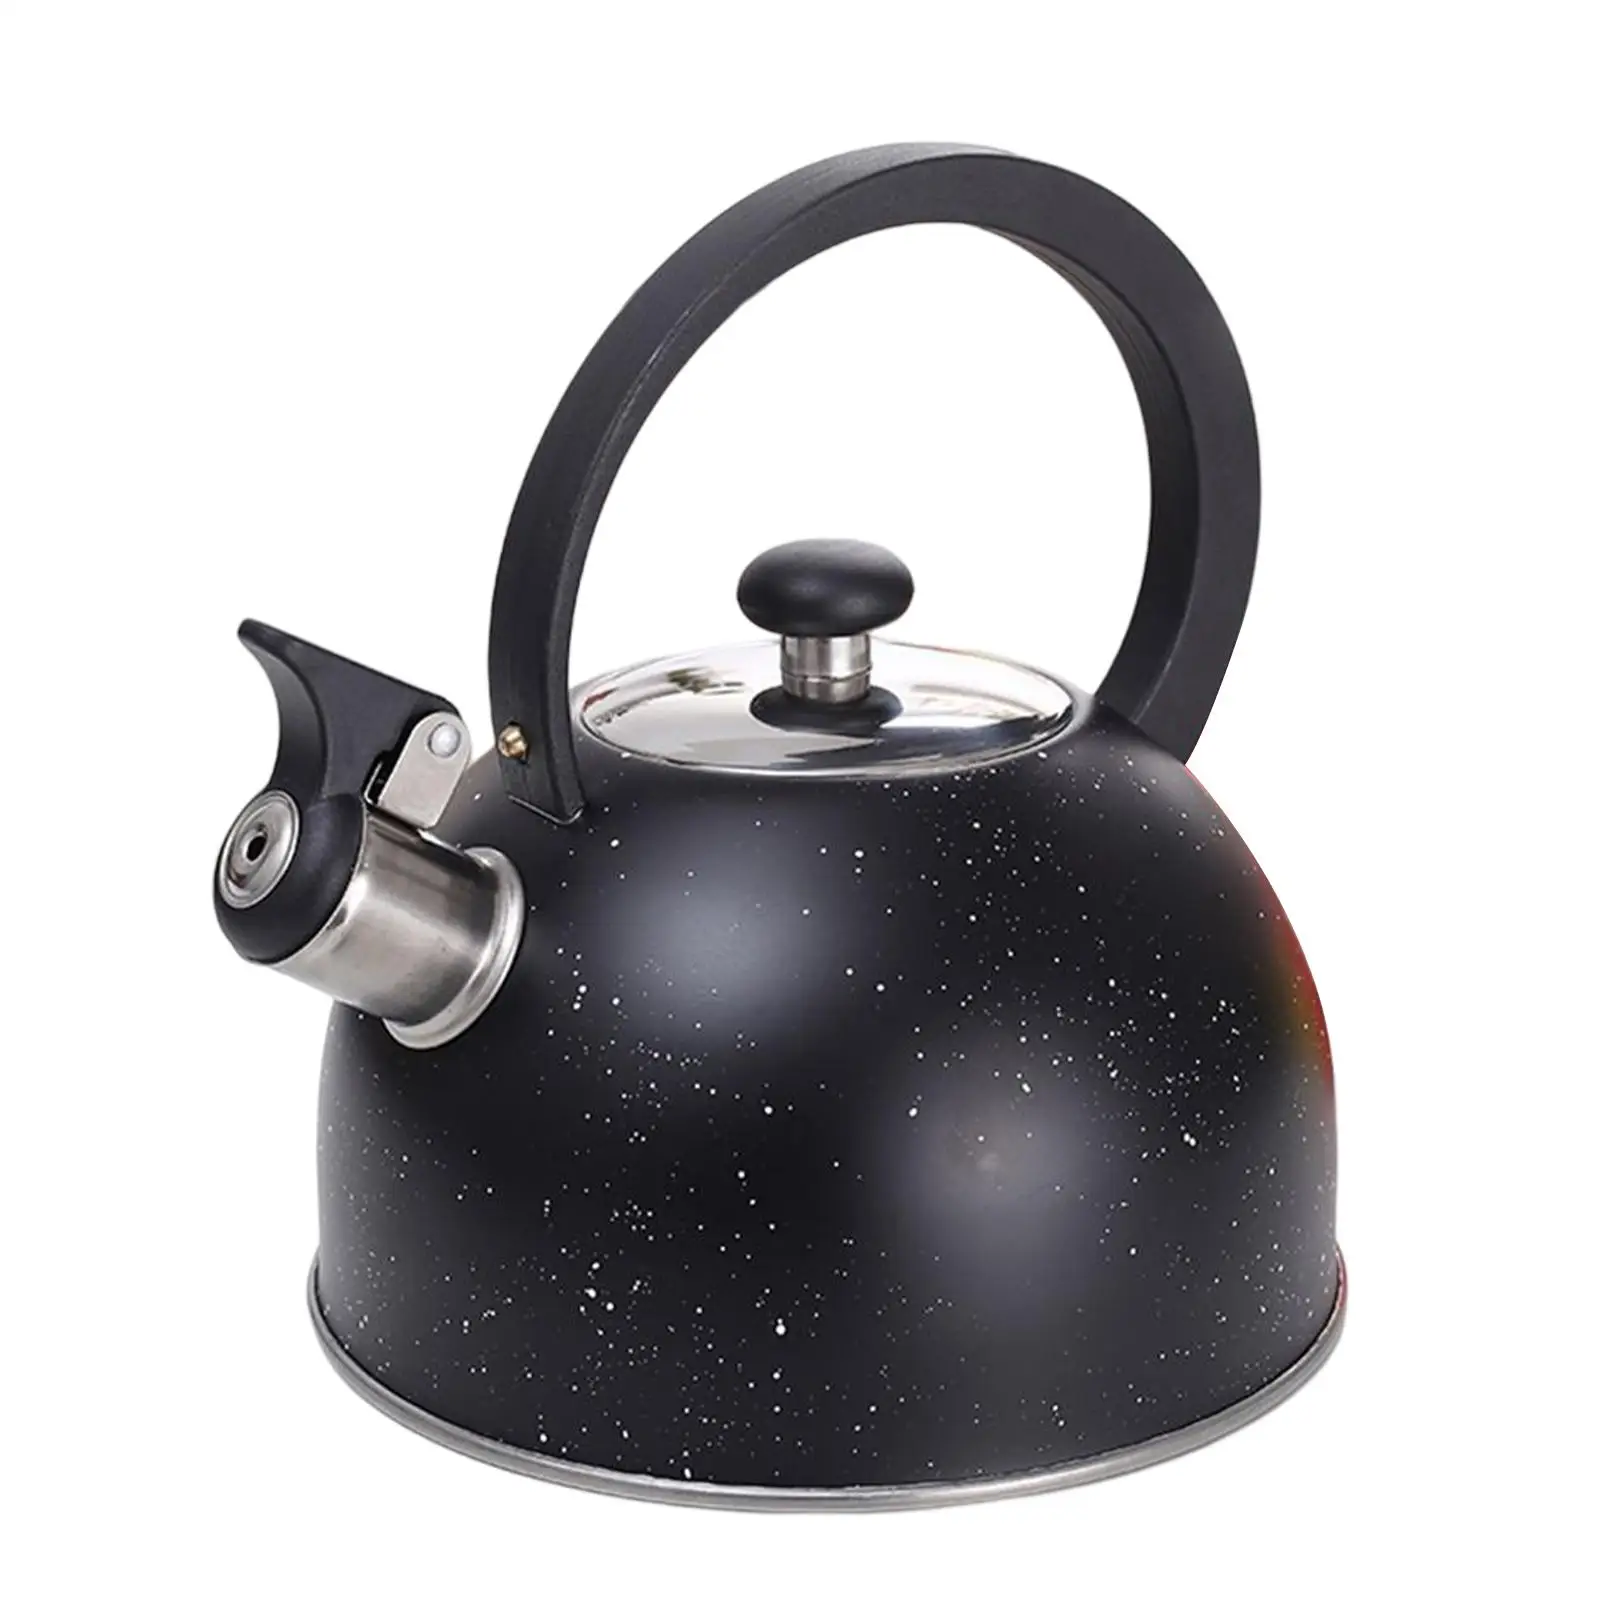 Stainless Steel Whistling Camping Kettle 2.5L Boil Water Tea Kettle for Kitchen